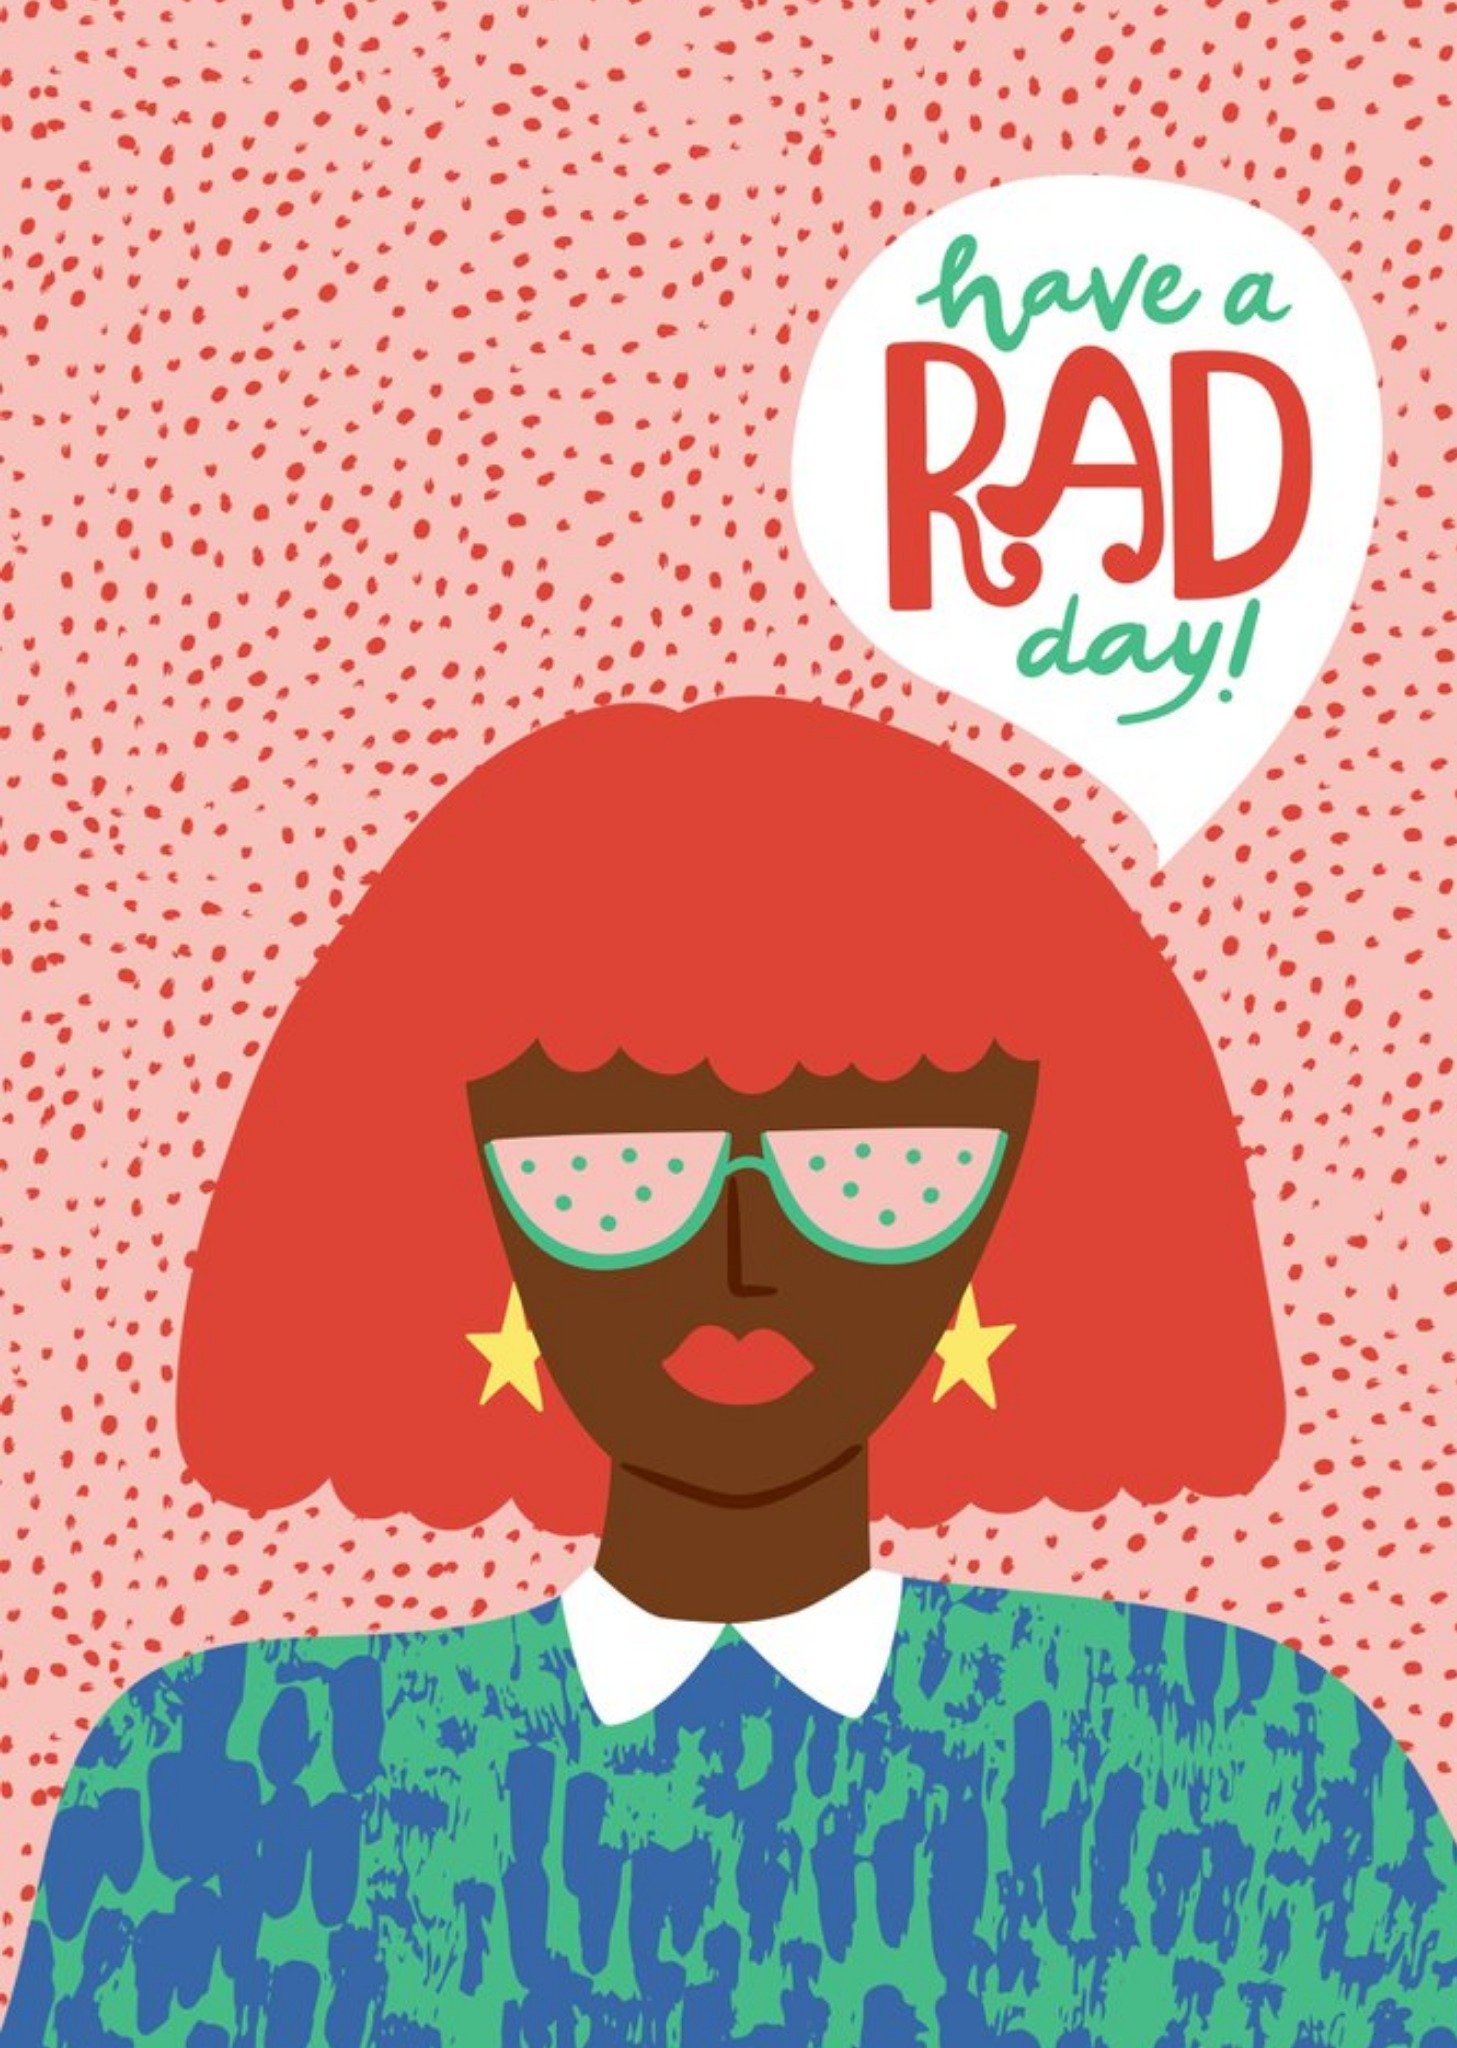 Moonpig Modern Illustrated Cool Lady Have A Rad Day Birthday Card, Large